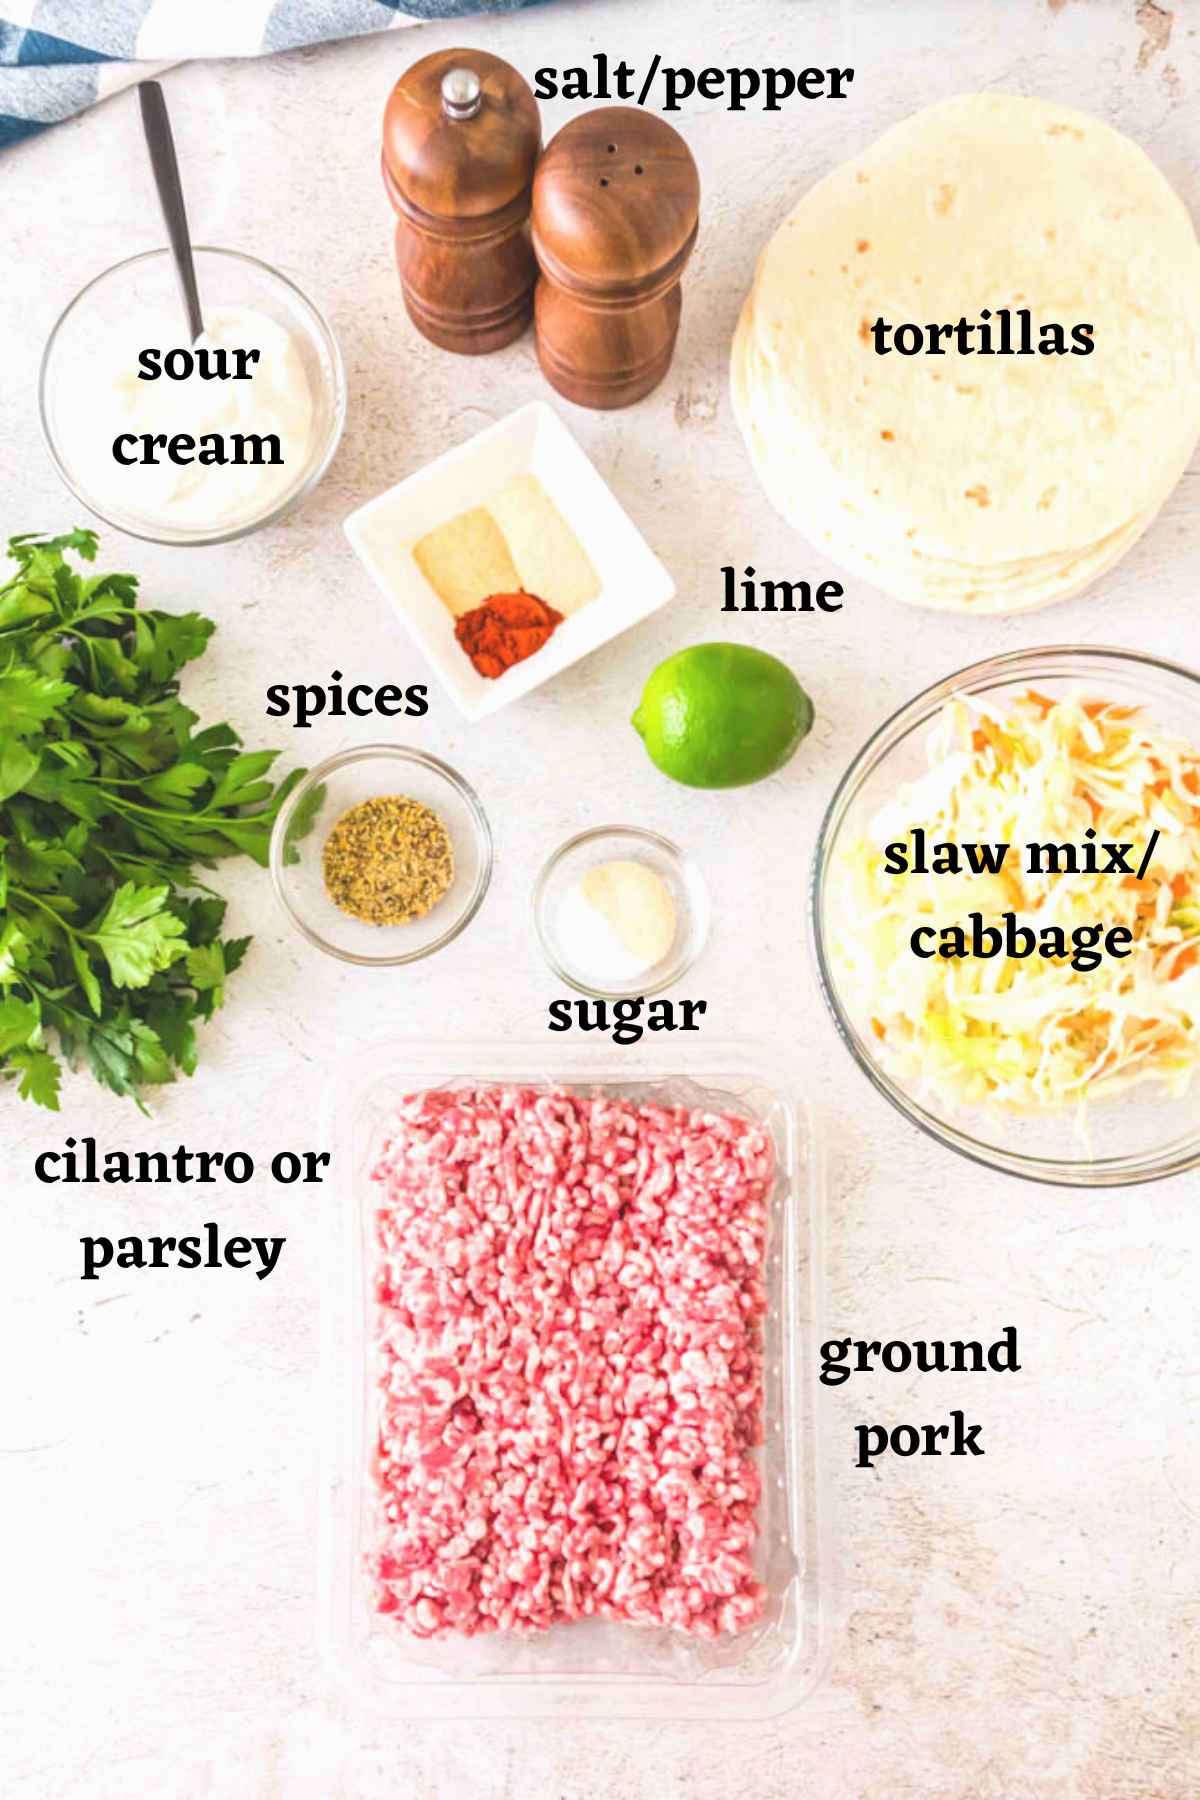 Ingredients needed to make easy ground pork tacos with cilantro slaw.